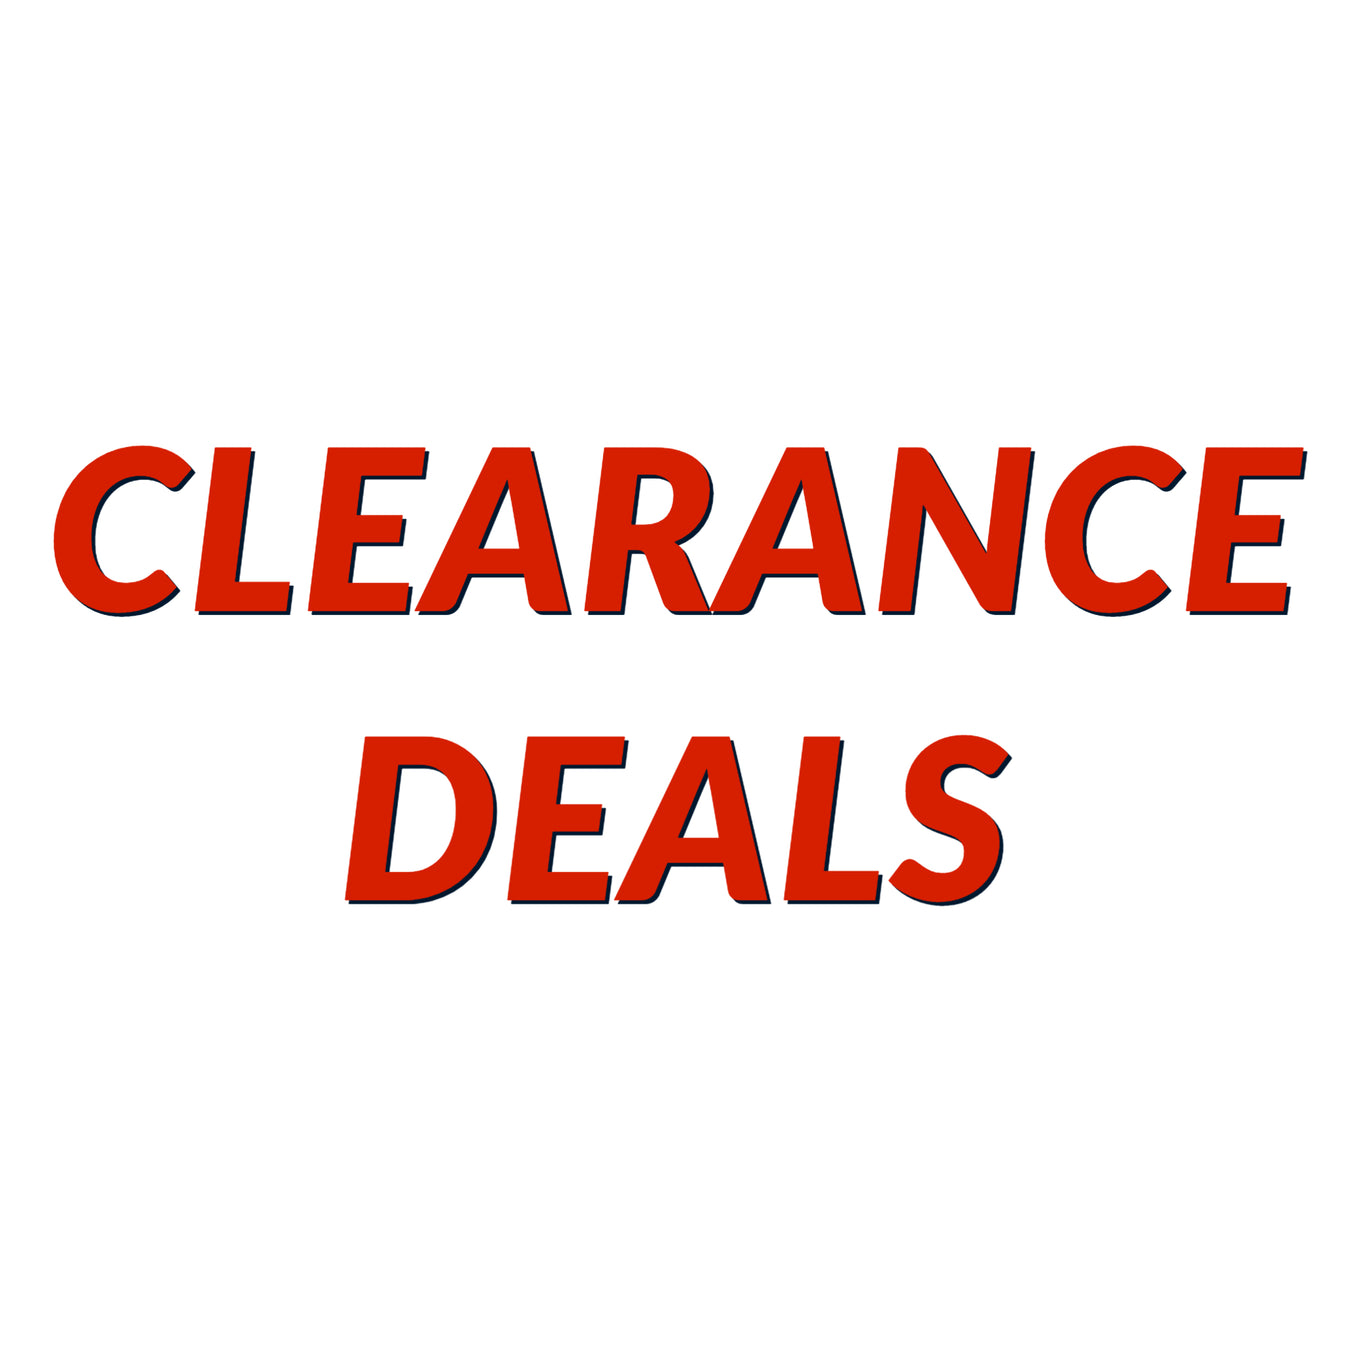 Clearance Deals in red writing. Sale items available at a reduced cost to the consumer. Purchase items on sale. 